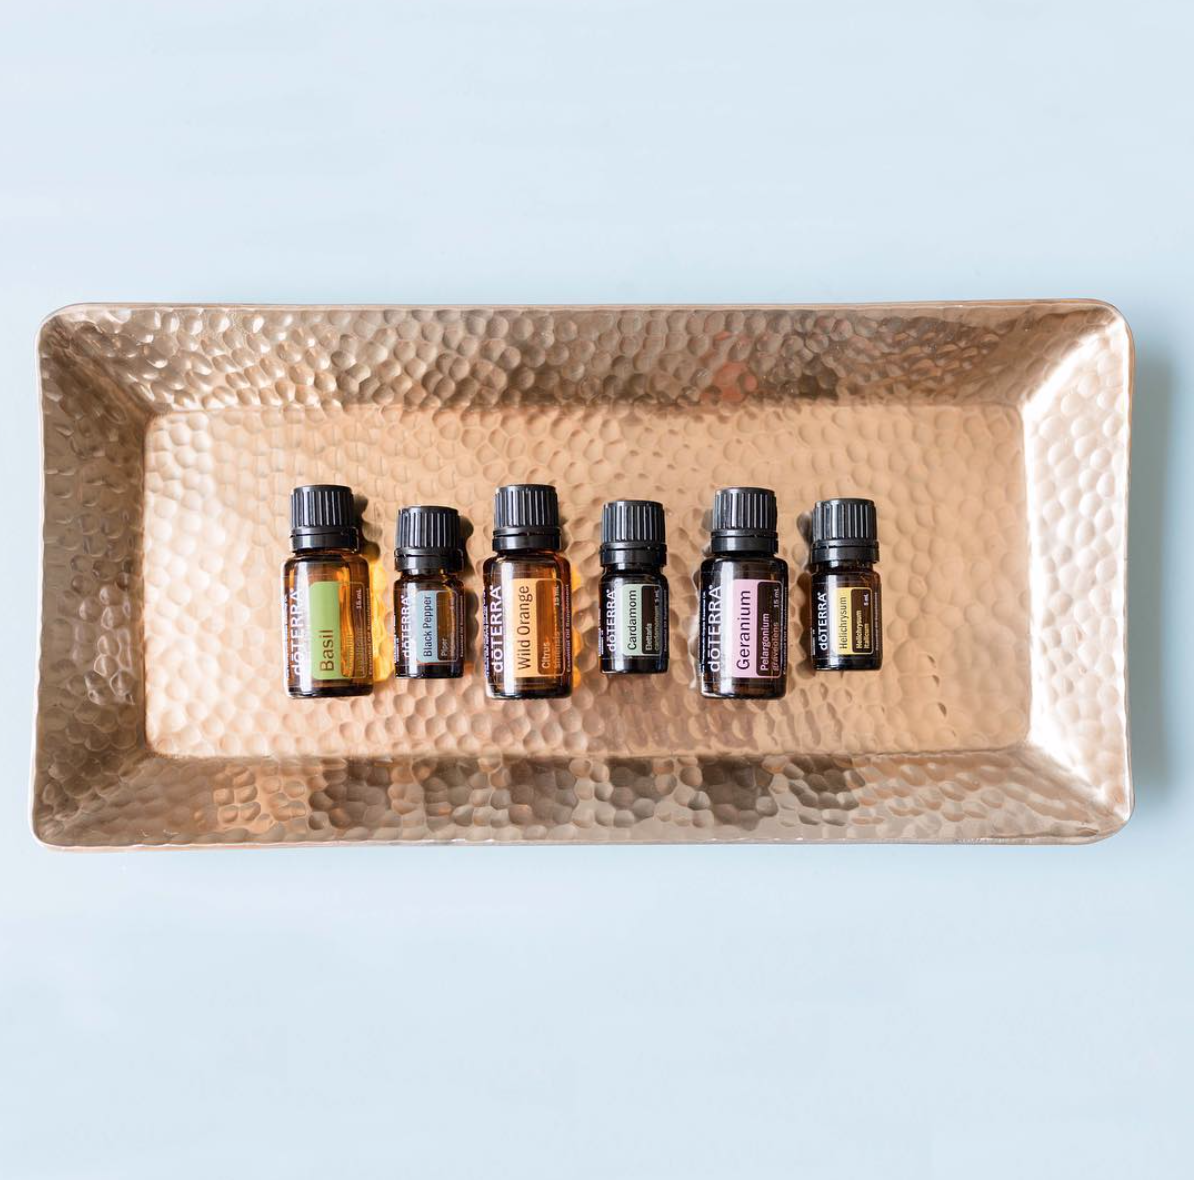 About doTERRA